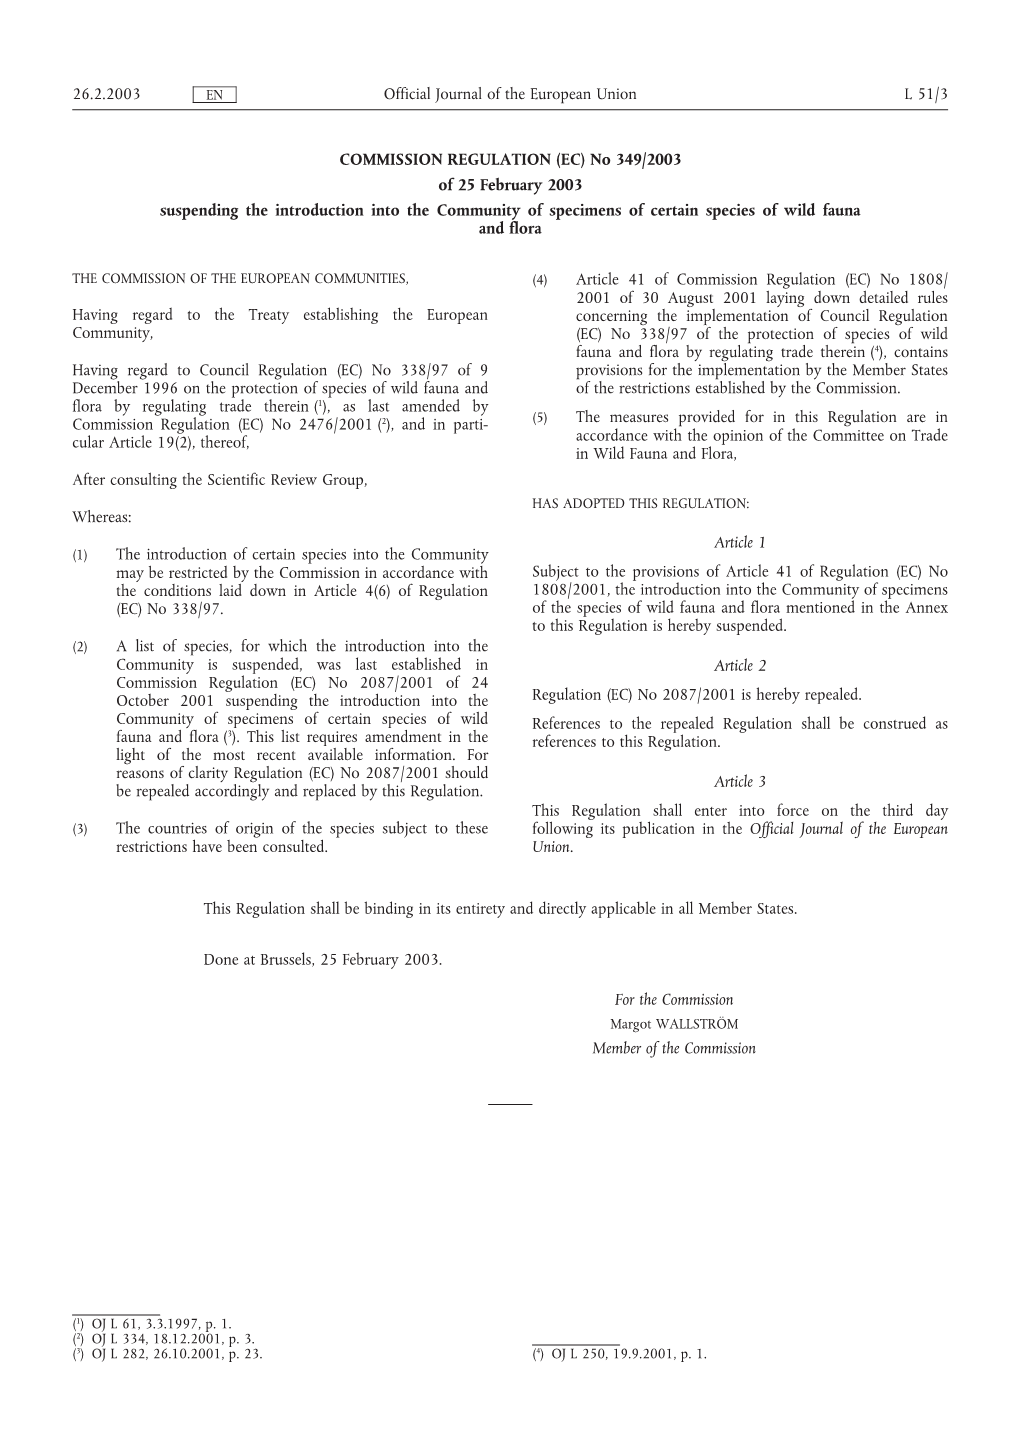 COMMISSION REGULATION (EC) No 349/2003 of 25 February 2003 Suspending the Introduction Into the Community of Specimens of Certain Species of Wild Fauna and Flora